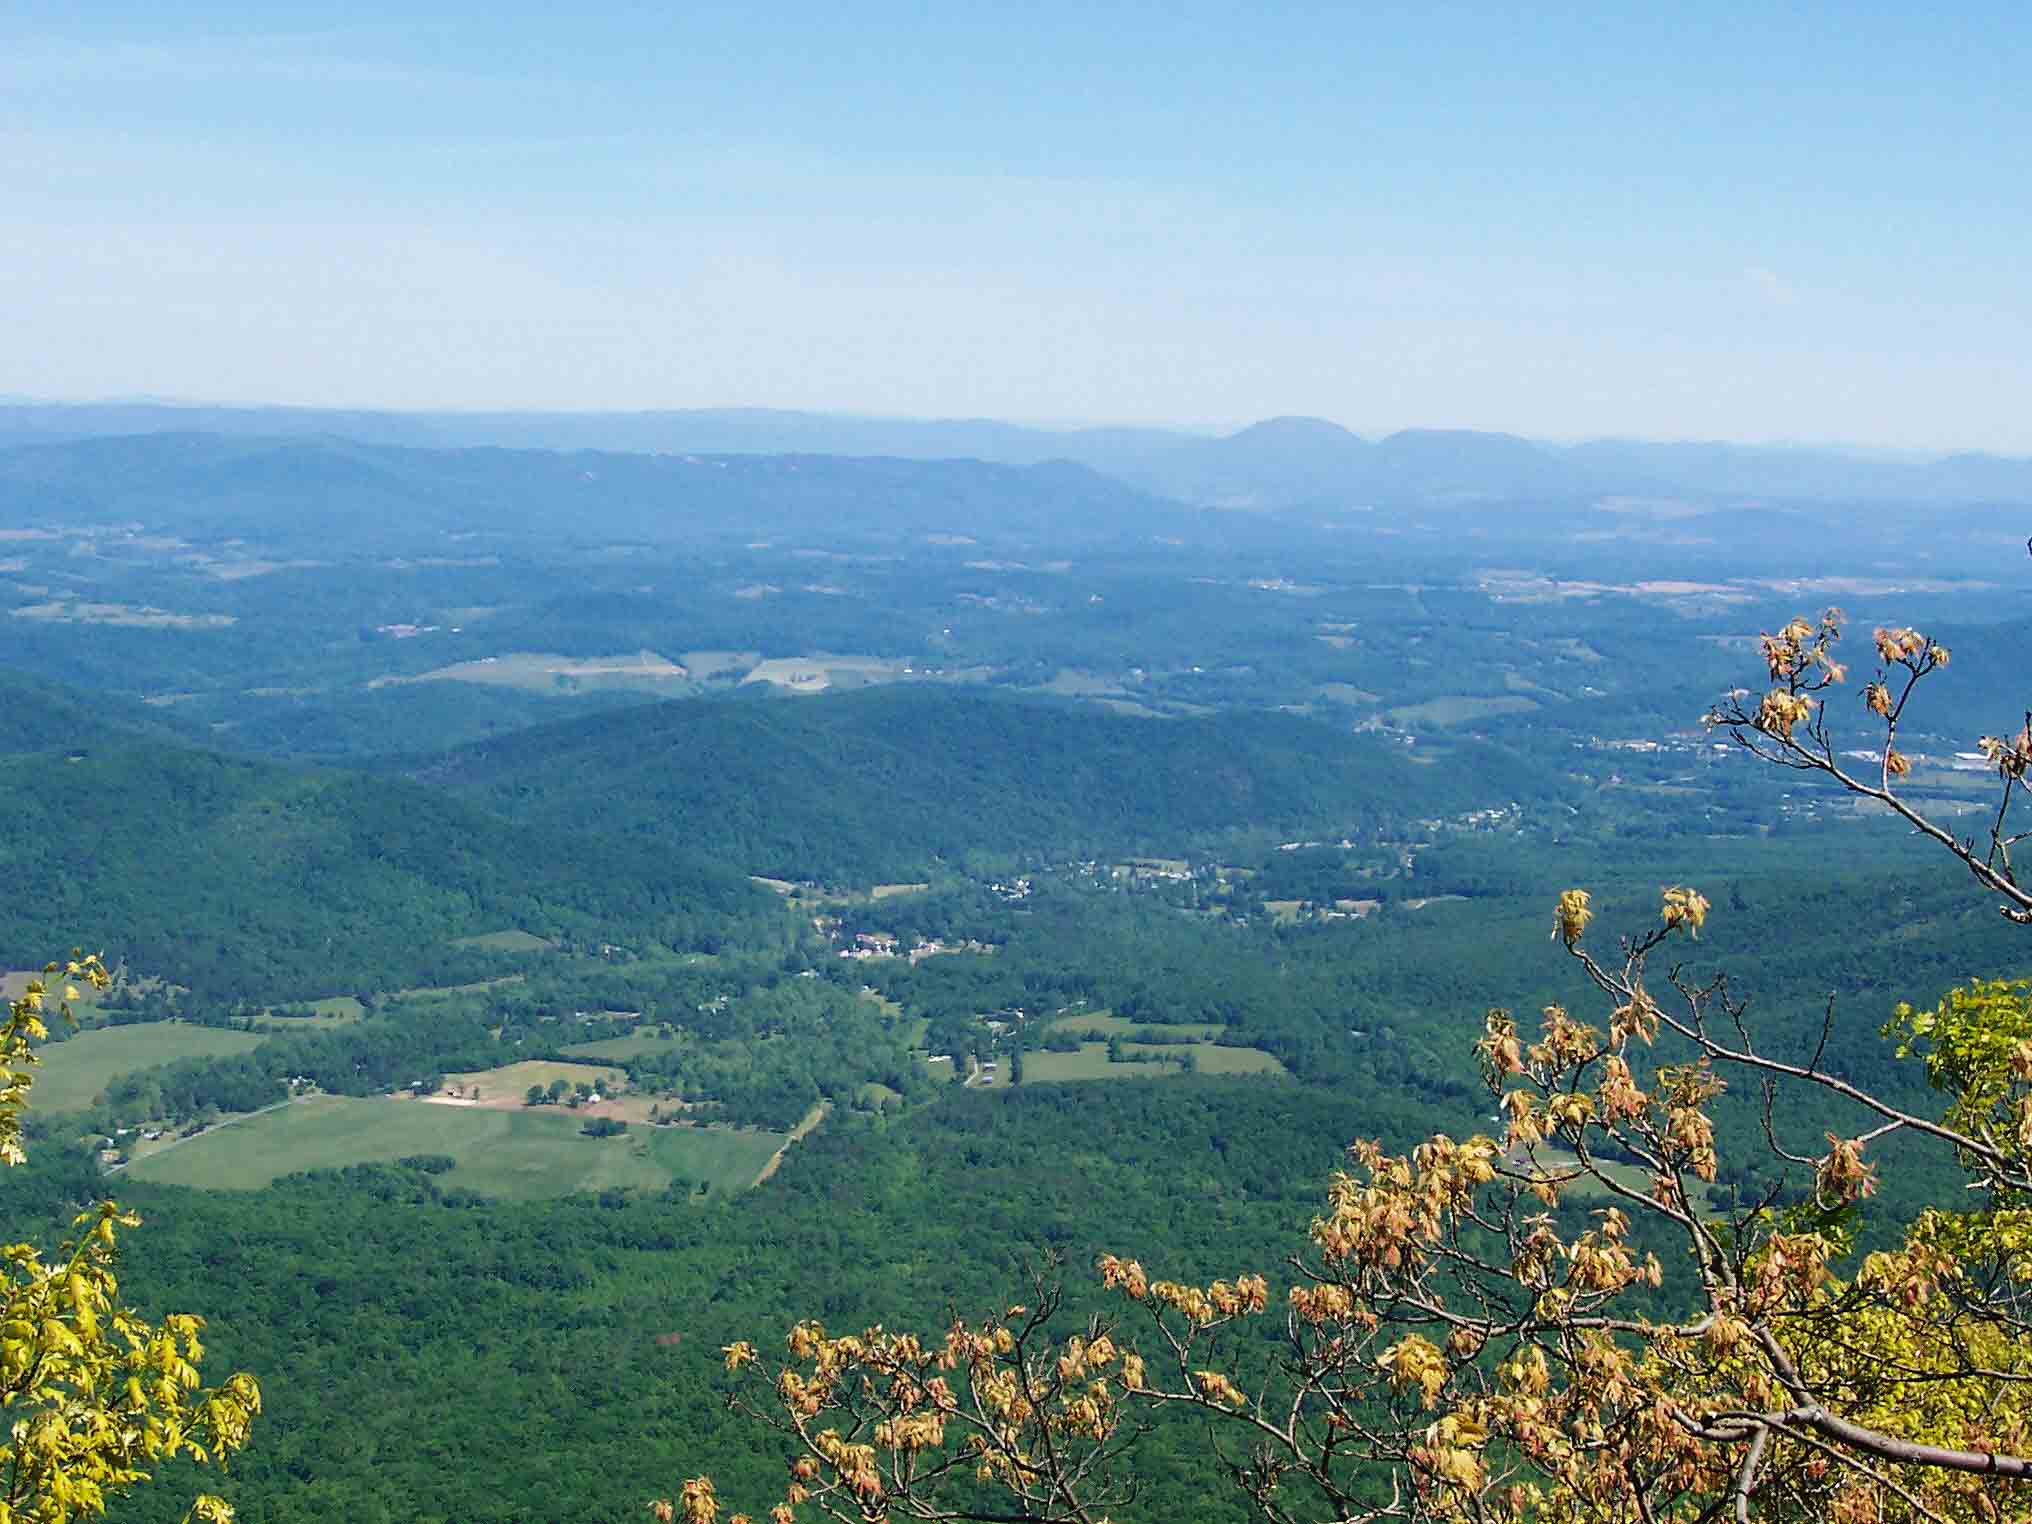 mm 3.3 - View west from Thunder Ridge Overlook. Courtesy dlcul@conncoll.edu